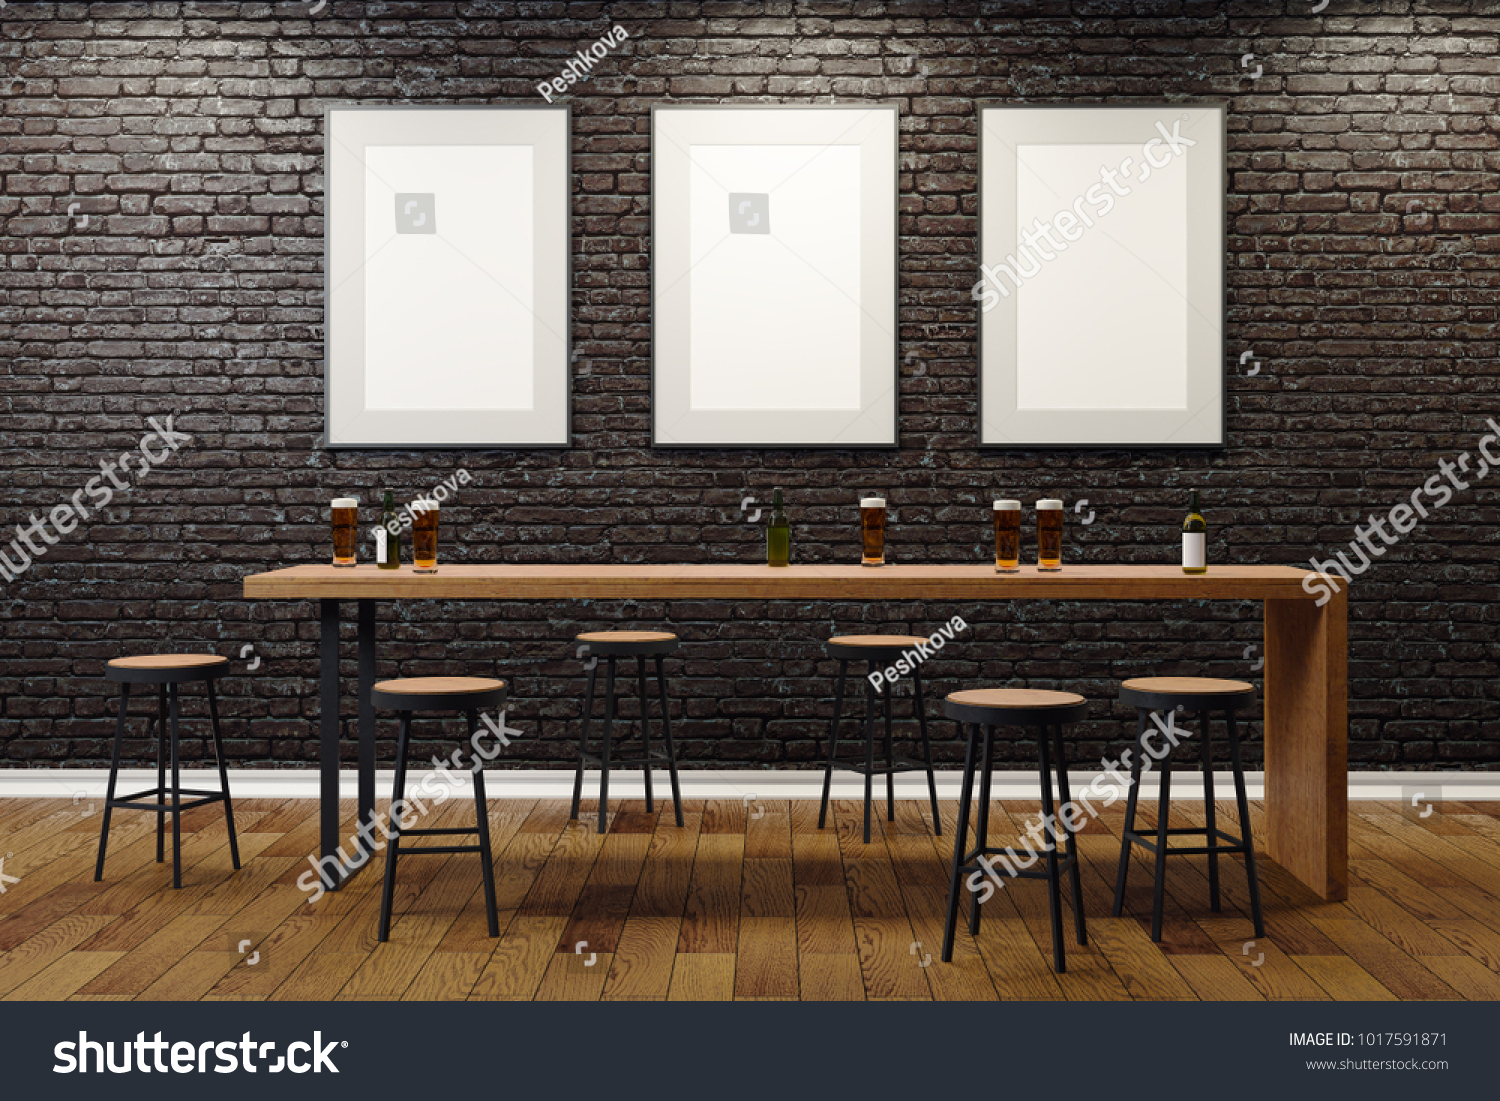 Contemporary black brick pub or bar interior with blank billboards on wall. Mock up, 3D Rendering #1017591871